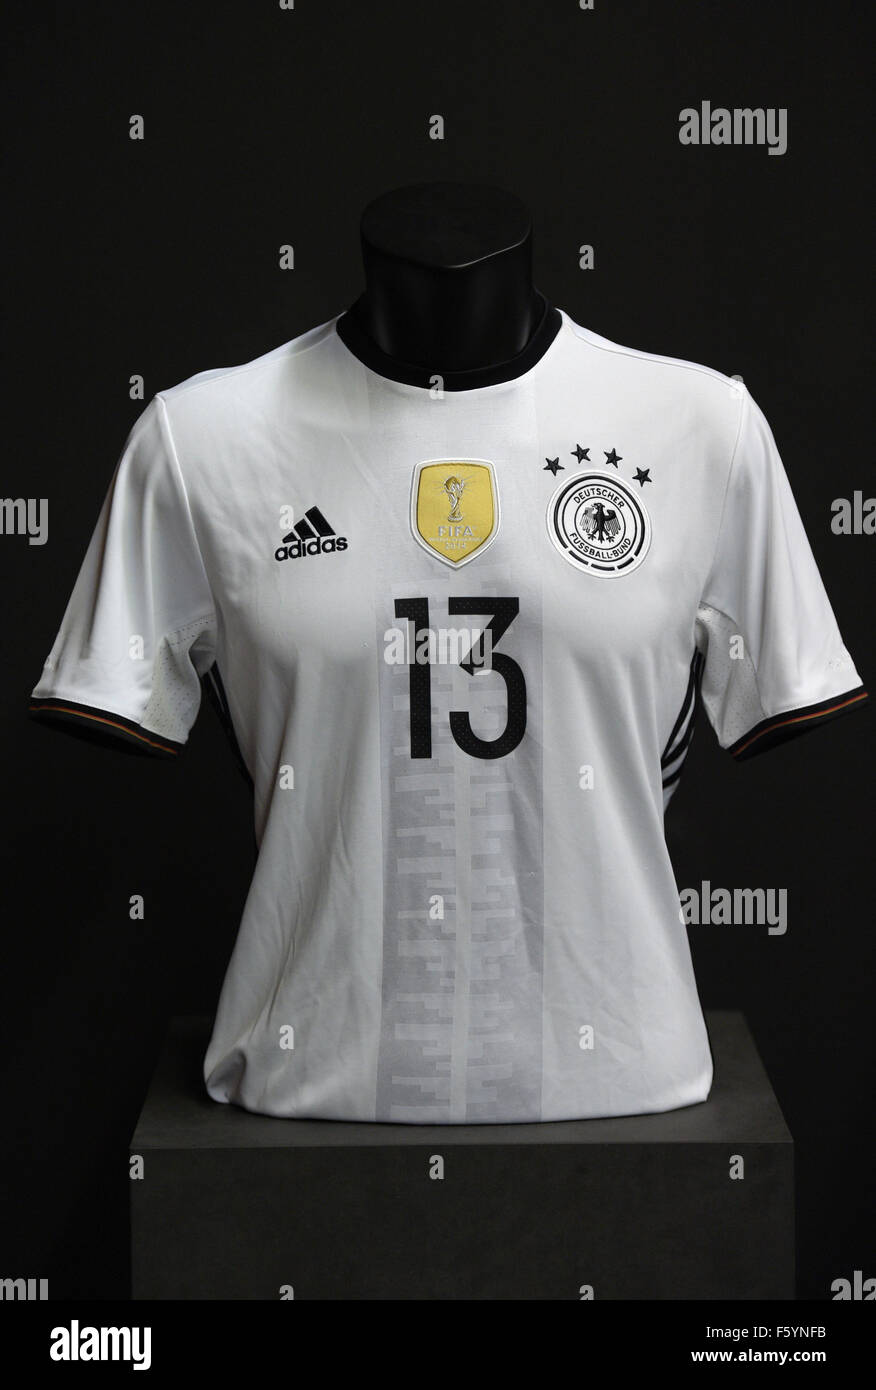 The new German national jersey is seen during the presentation of the  German national soccer team kit for the UEFA Euro 2016 in France, provided  by Adidas, in Berlin, Germany, 09 November